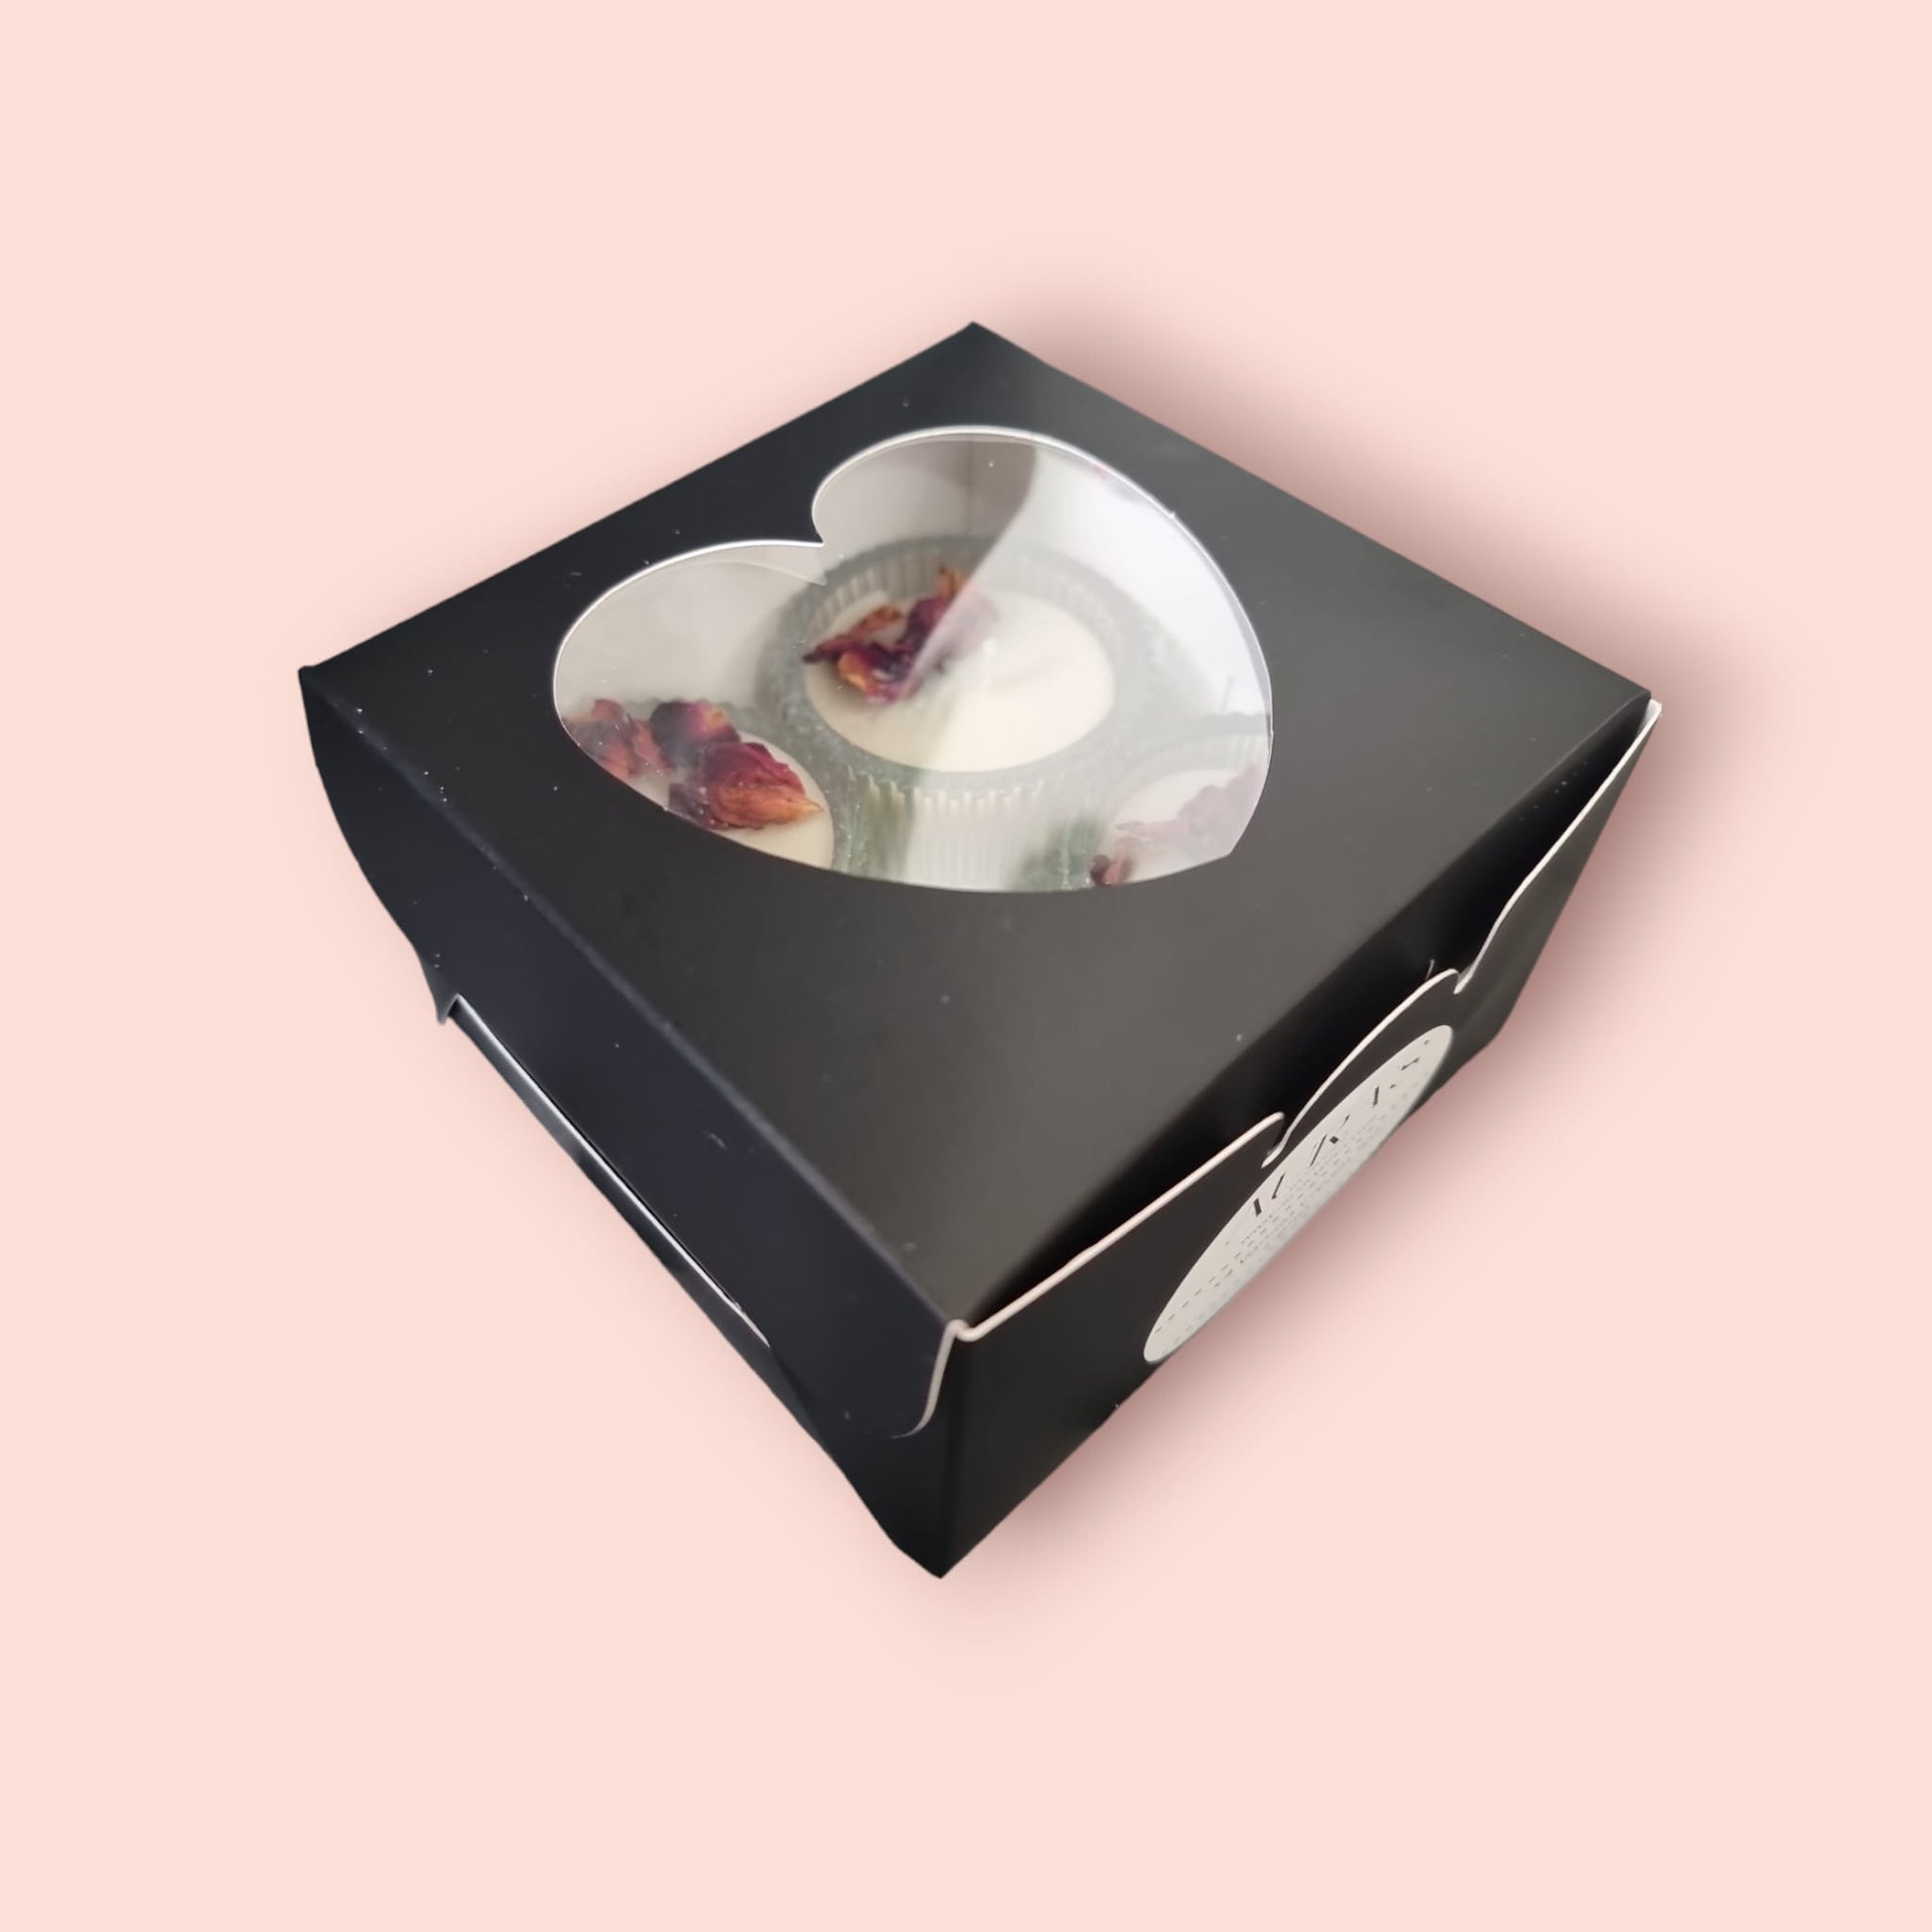 Valentine's Gift Set - Heart-Shaped Tealights in Vanilla Cream Scent with Rose Petals, Presented in a Black Box - Auras Workshop  -   -   - Cyprus & Greece - Wholesale - Retail #